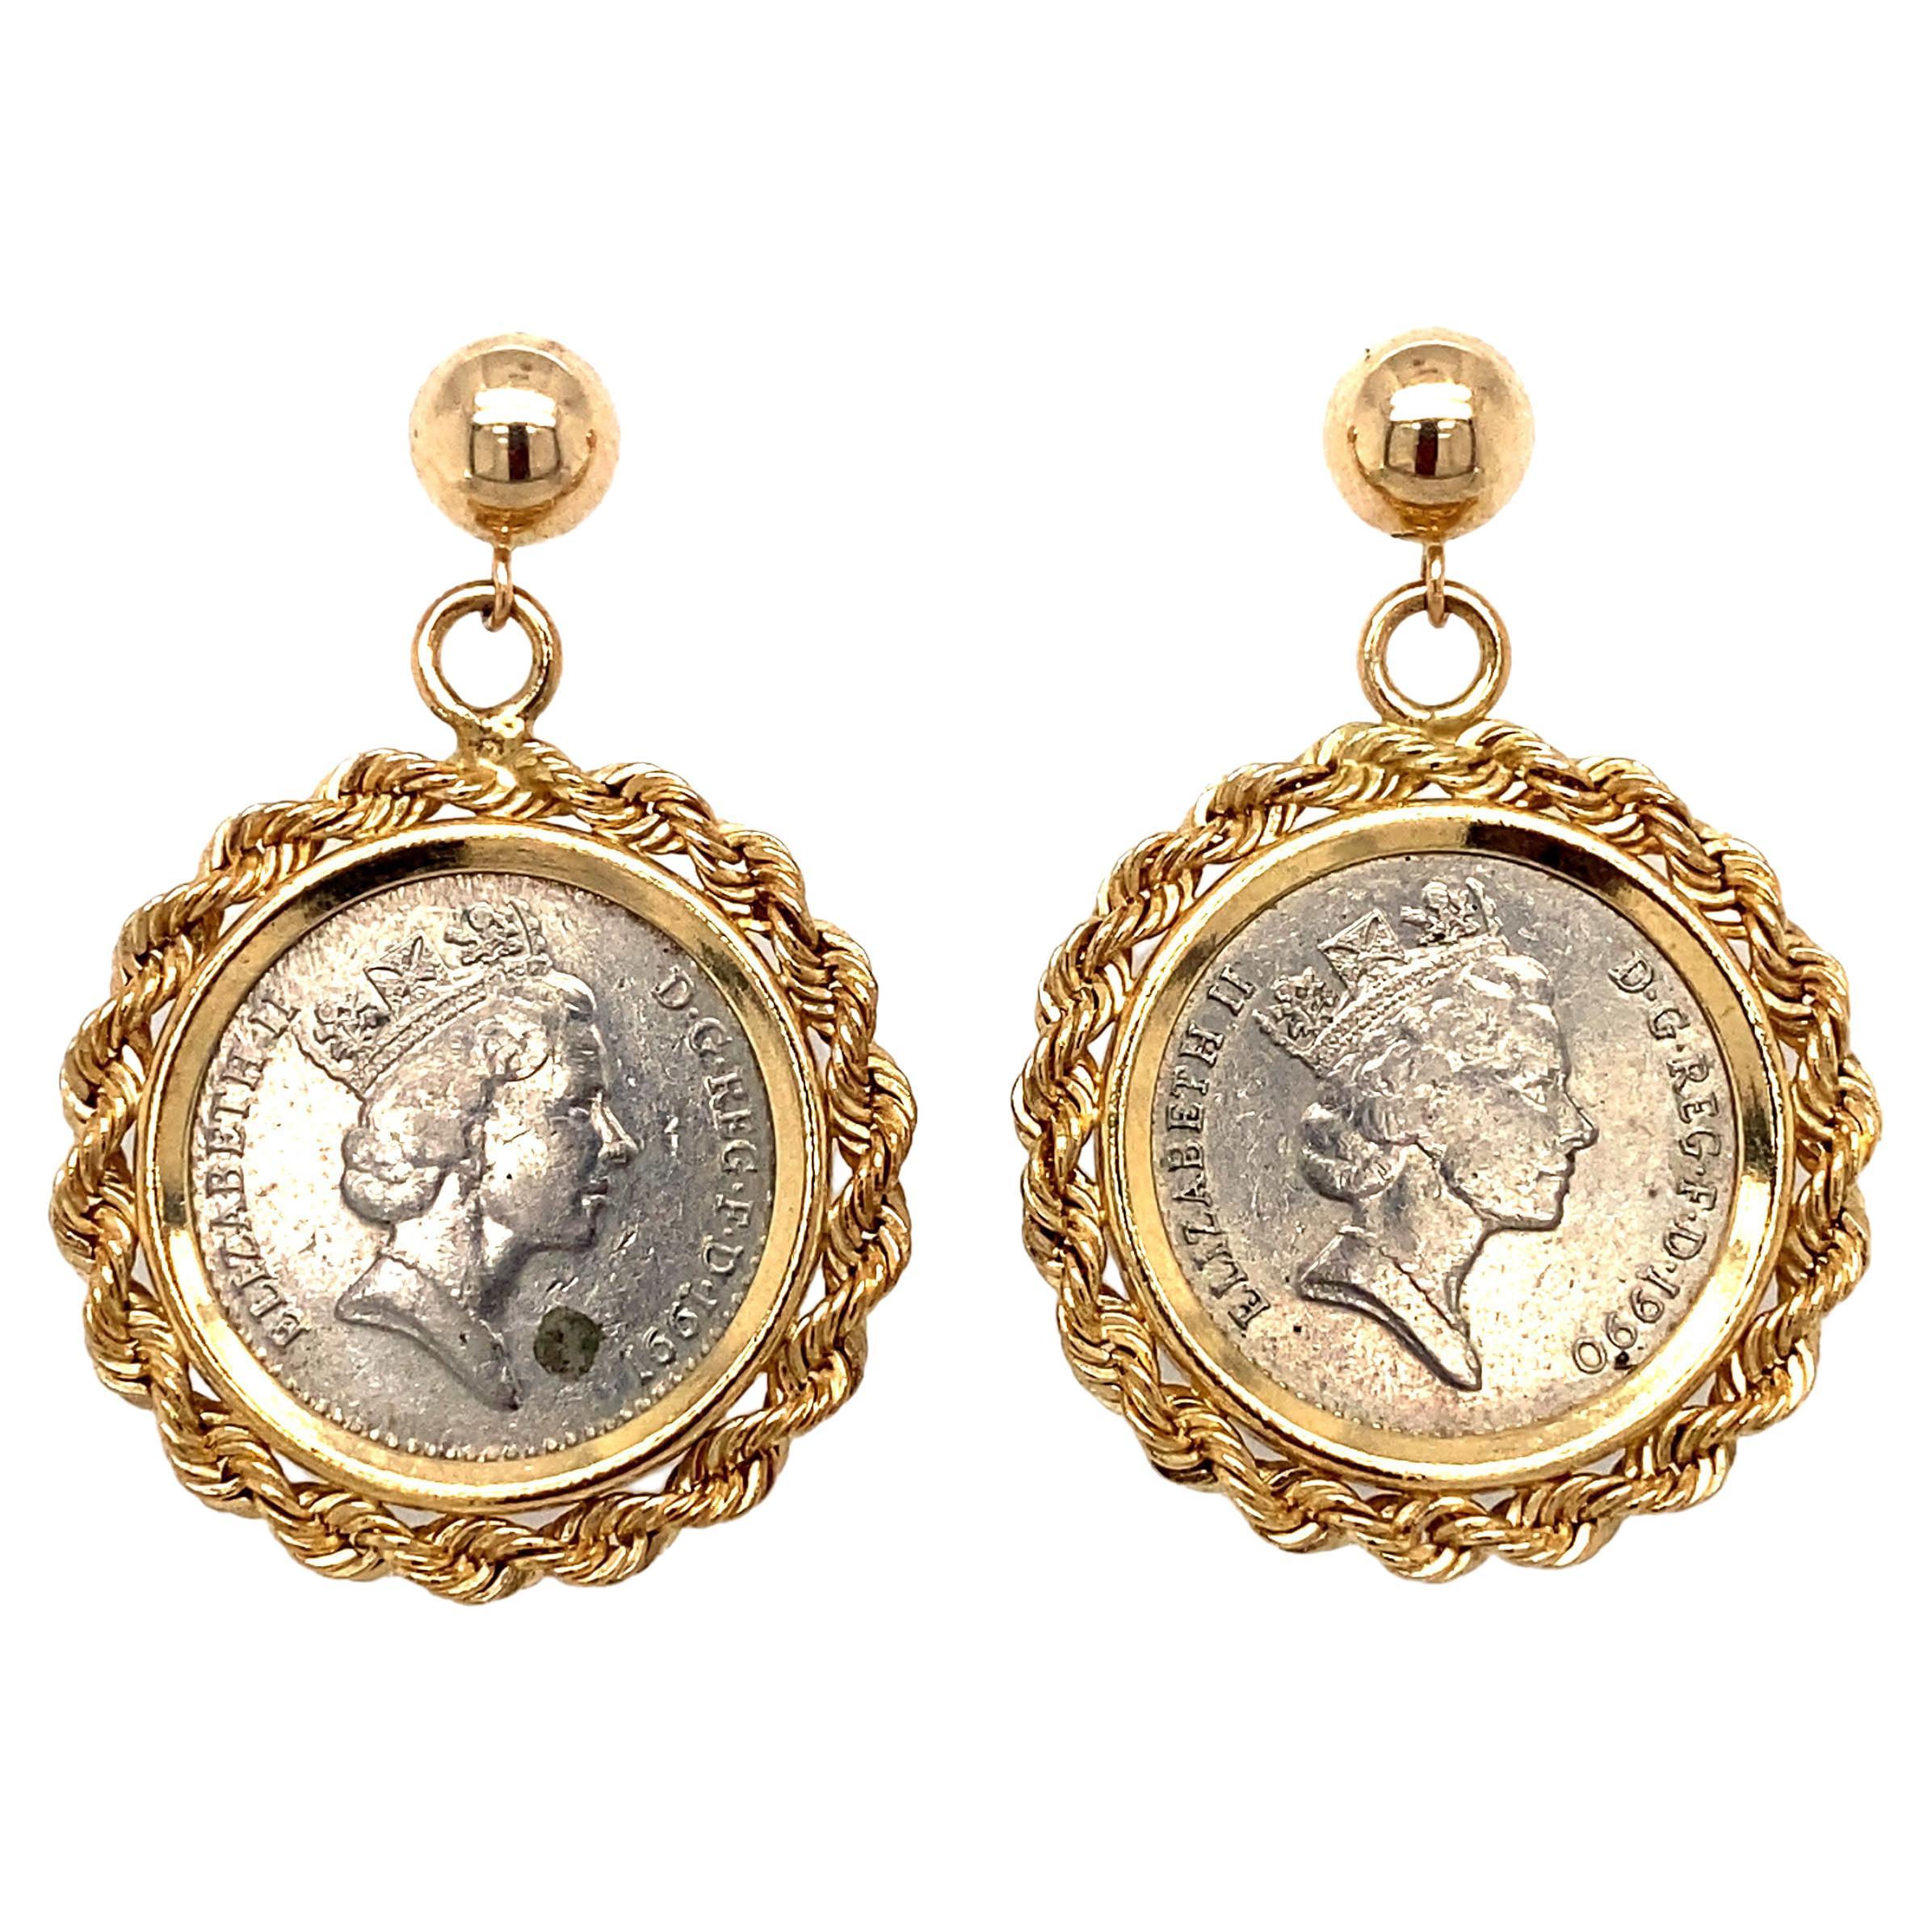 1990s Five British Pence Coin Earrings with Rope Frames in 14 Karat Gold For Sale